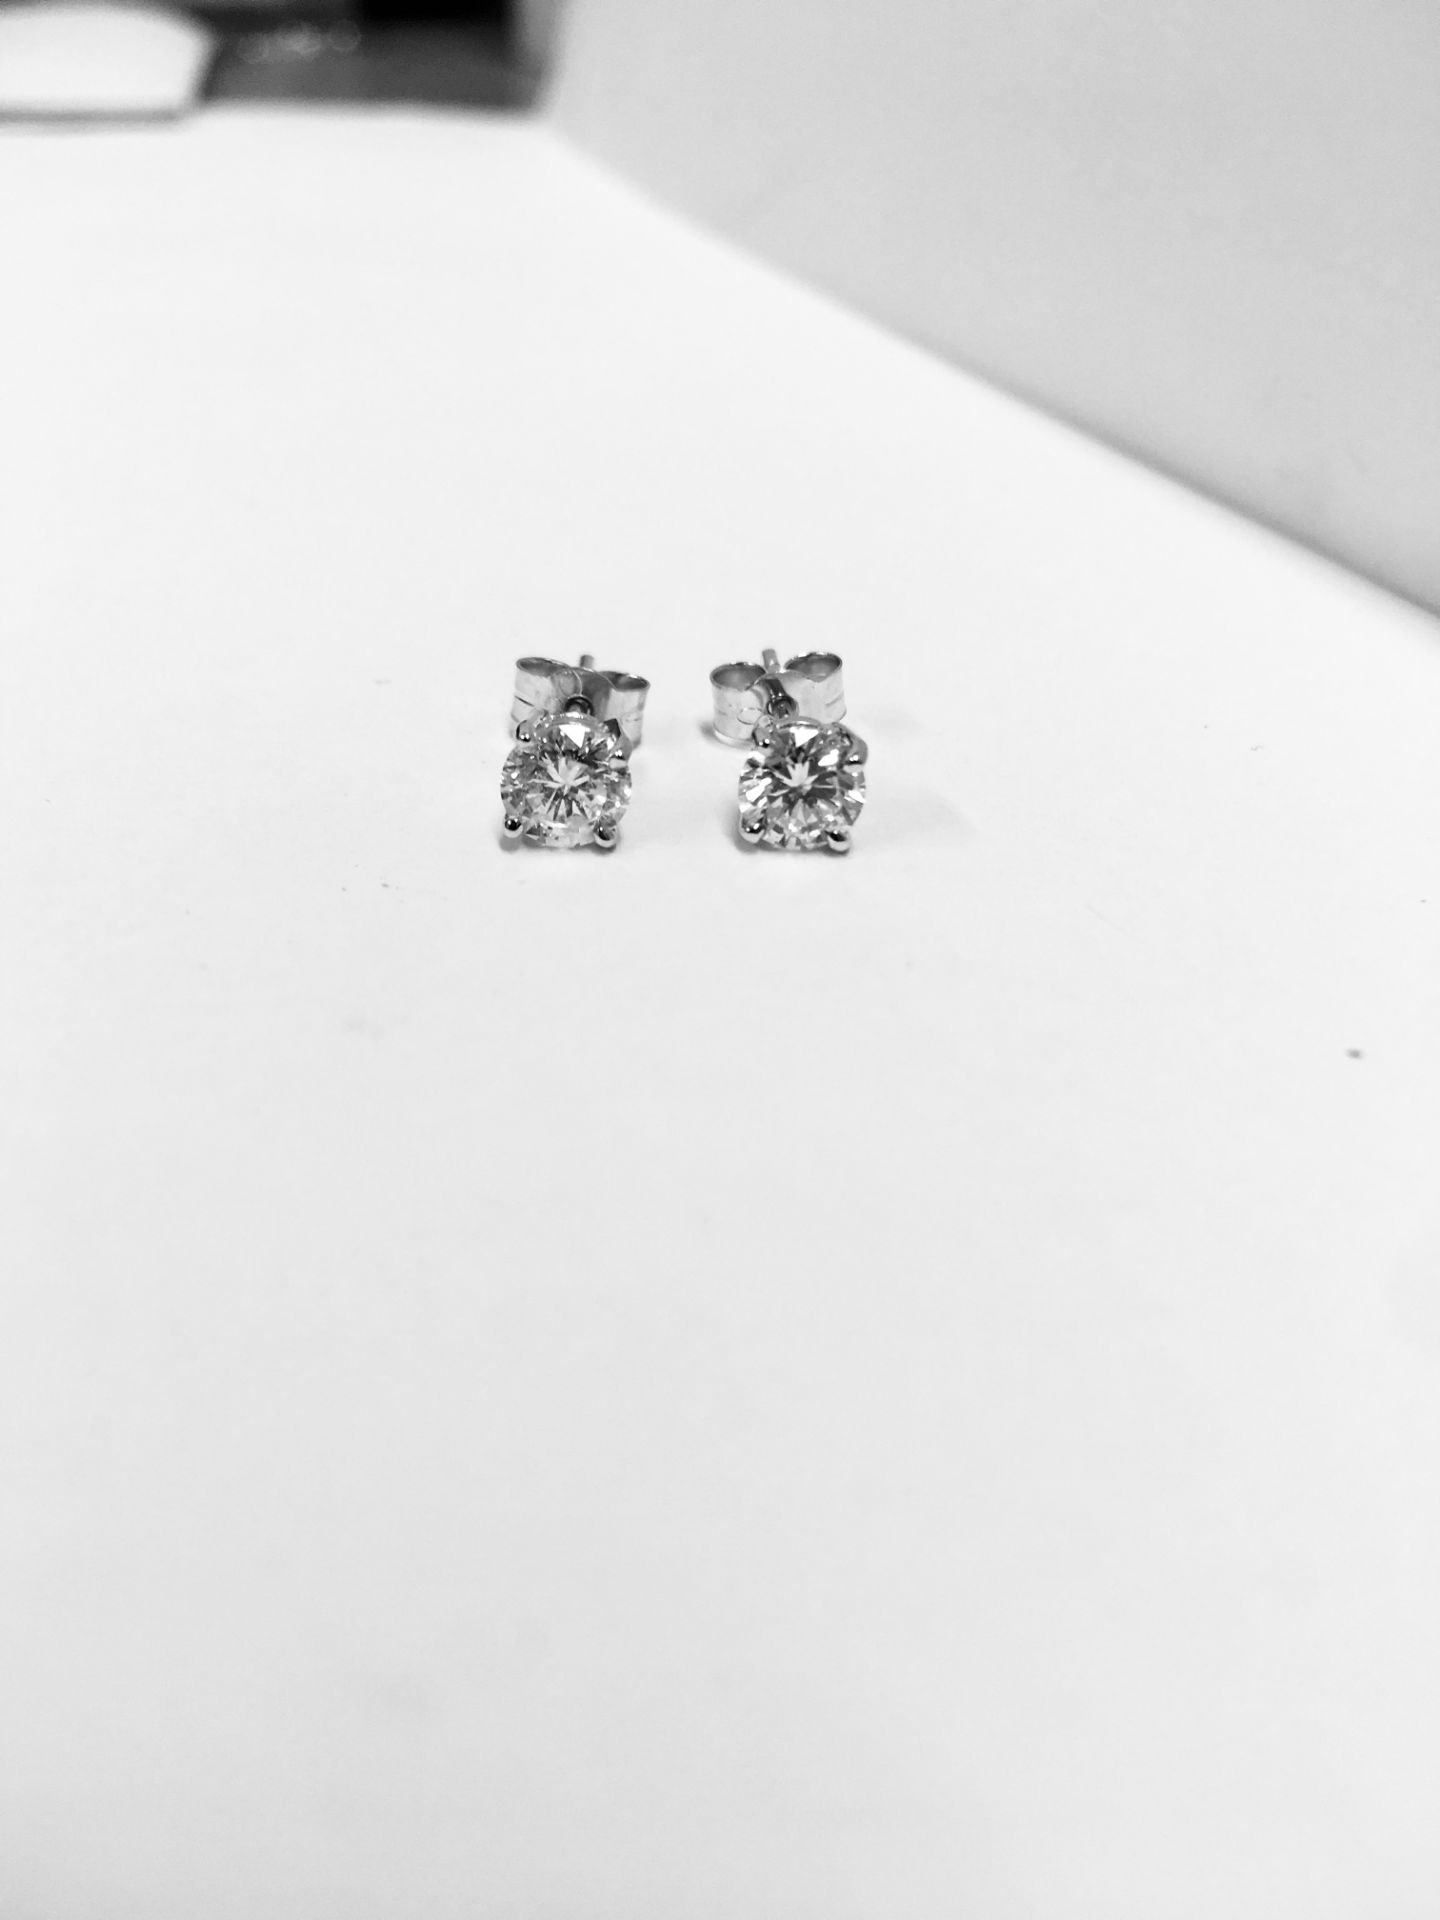 1.00Ct Diamond Solitaire Earrings Set In 18Ct White Gold. - Image 18 of 18